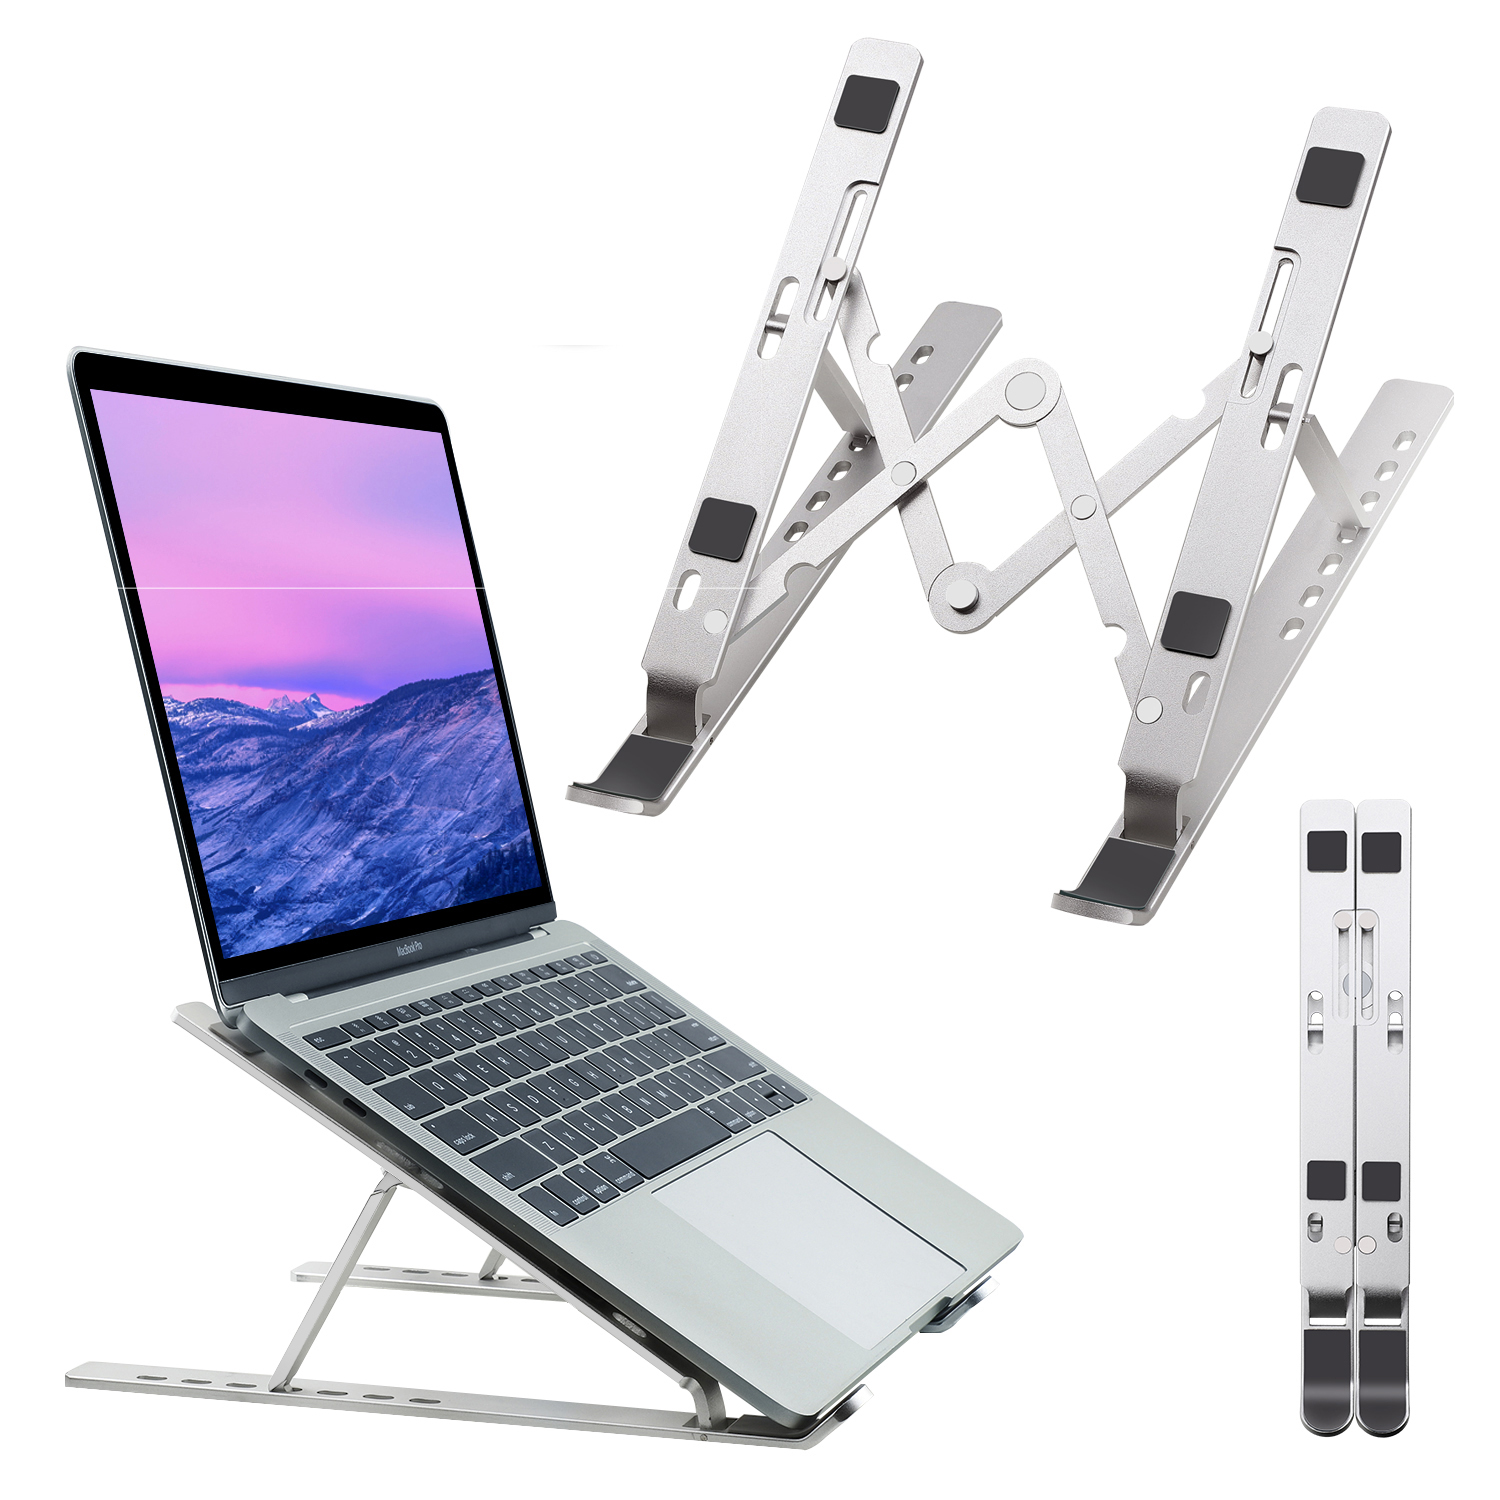 ALUMINIUM ALLOY FULLY-LEVEL ADJUSTABLE LAPTOP STAND FOR 10 TO 17 INCHES MACKBOOK/LAPTOPS